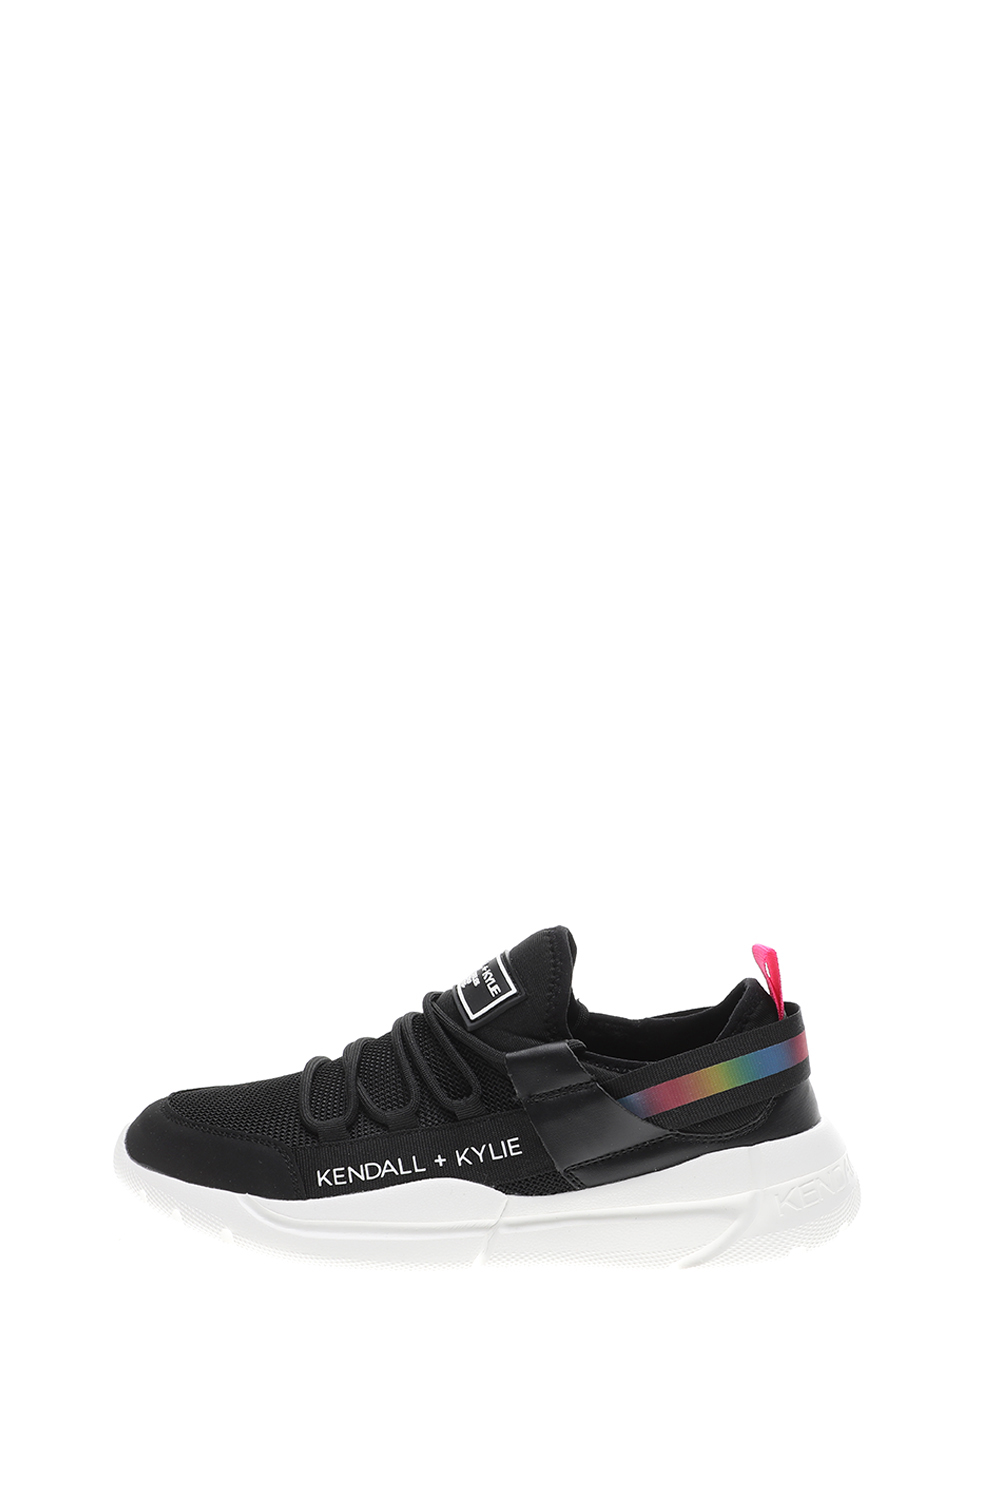 KENDALL + KYLIE – Γυναικεία sneakers KENDALL + KYLIE NECI μαύρα